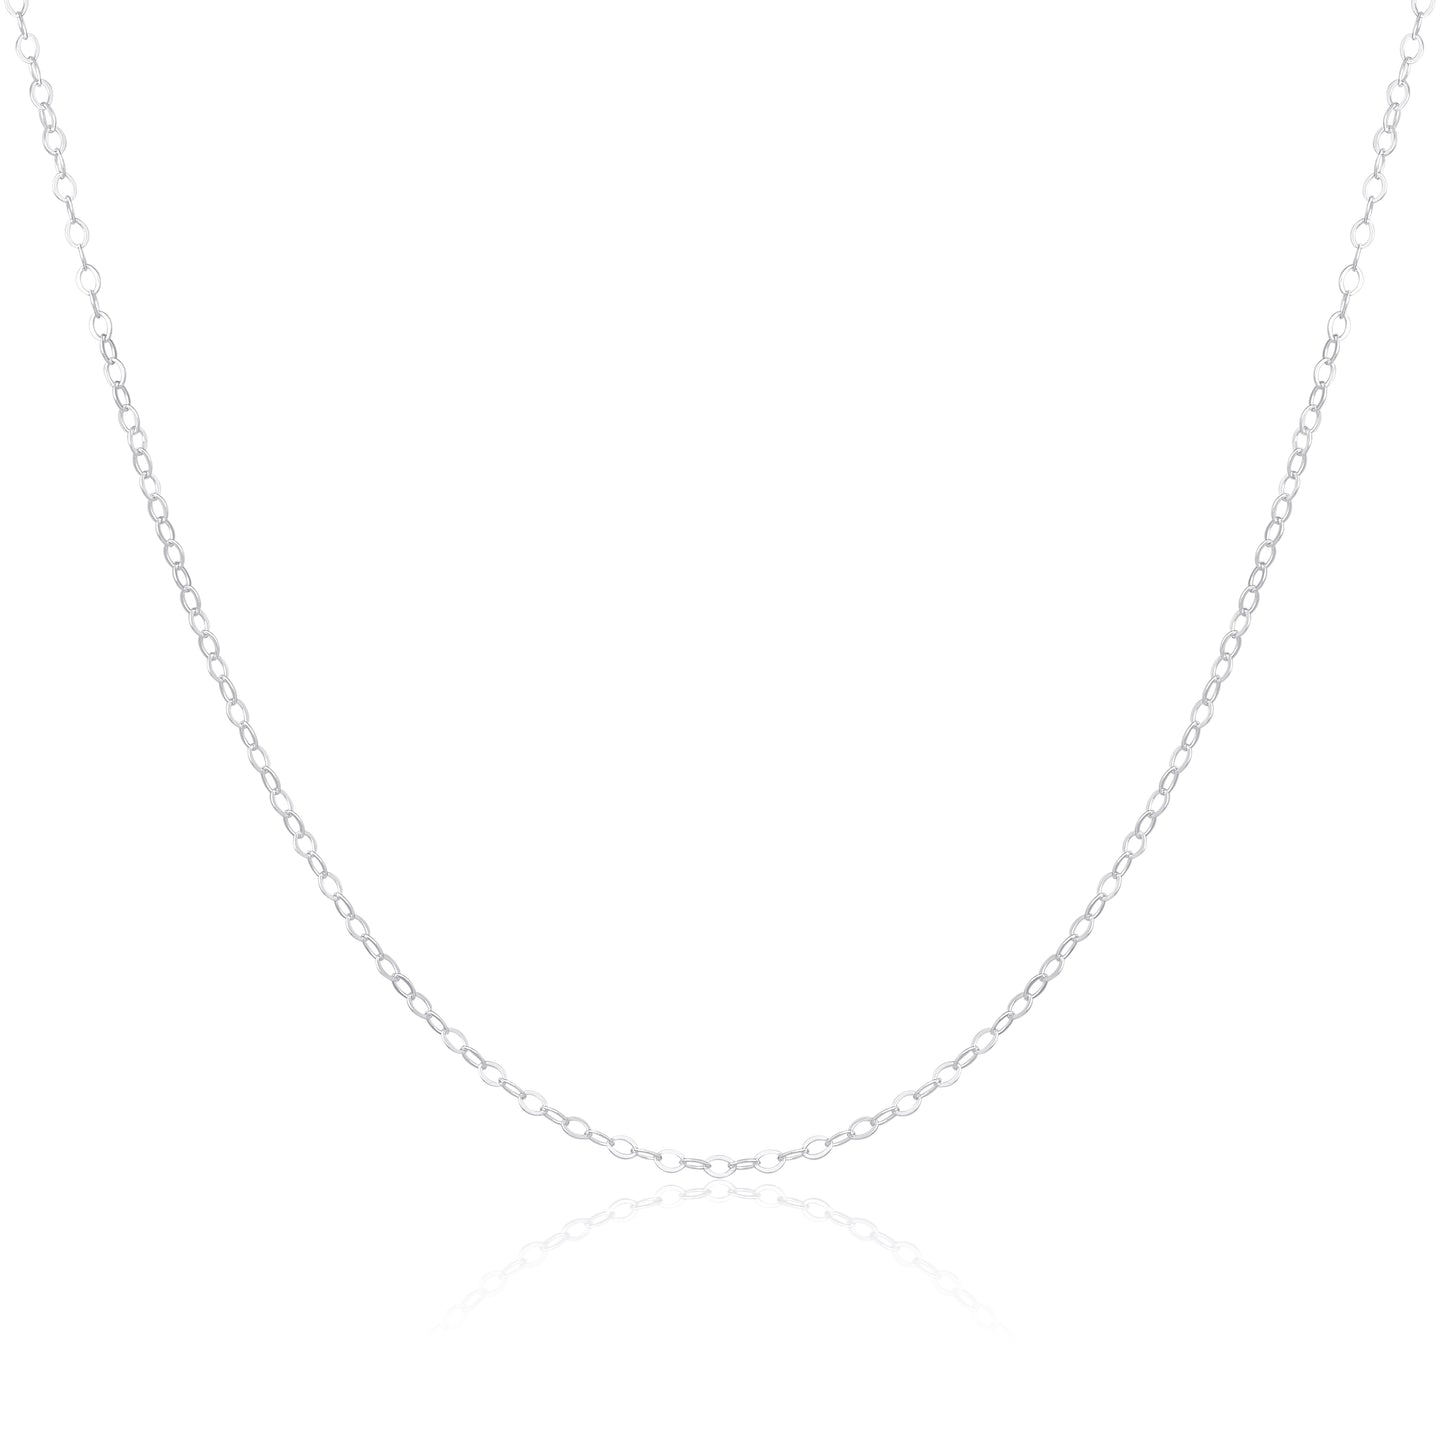 Light Sterling Silver Flat Cable Chain Necklace 16 - 22 Inches